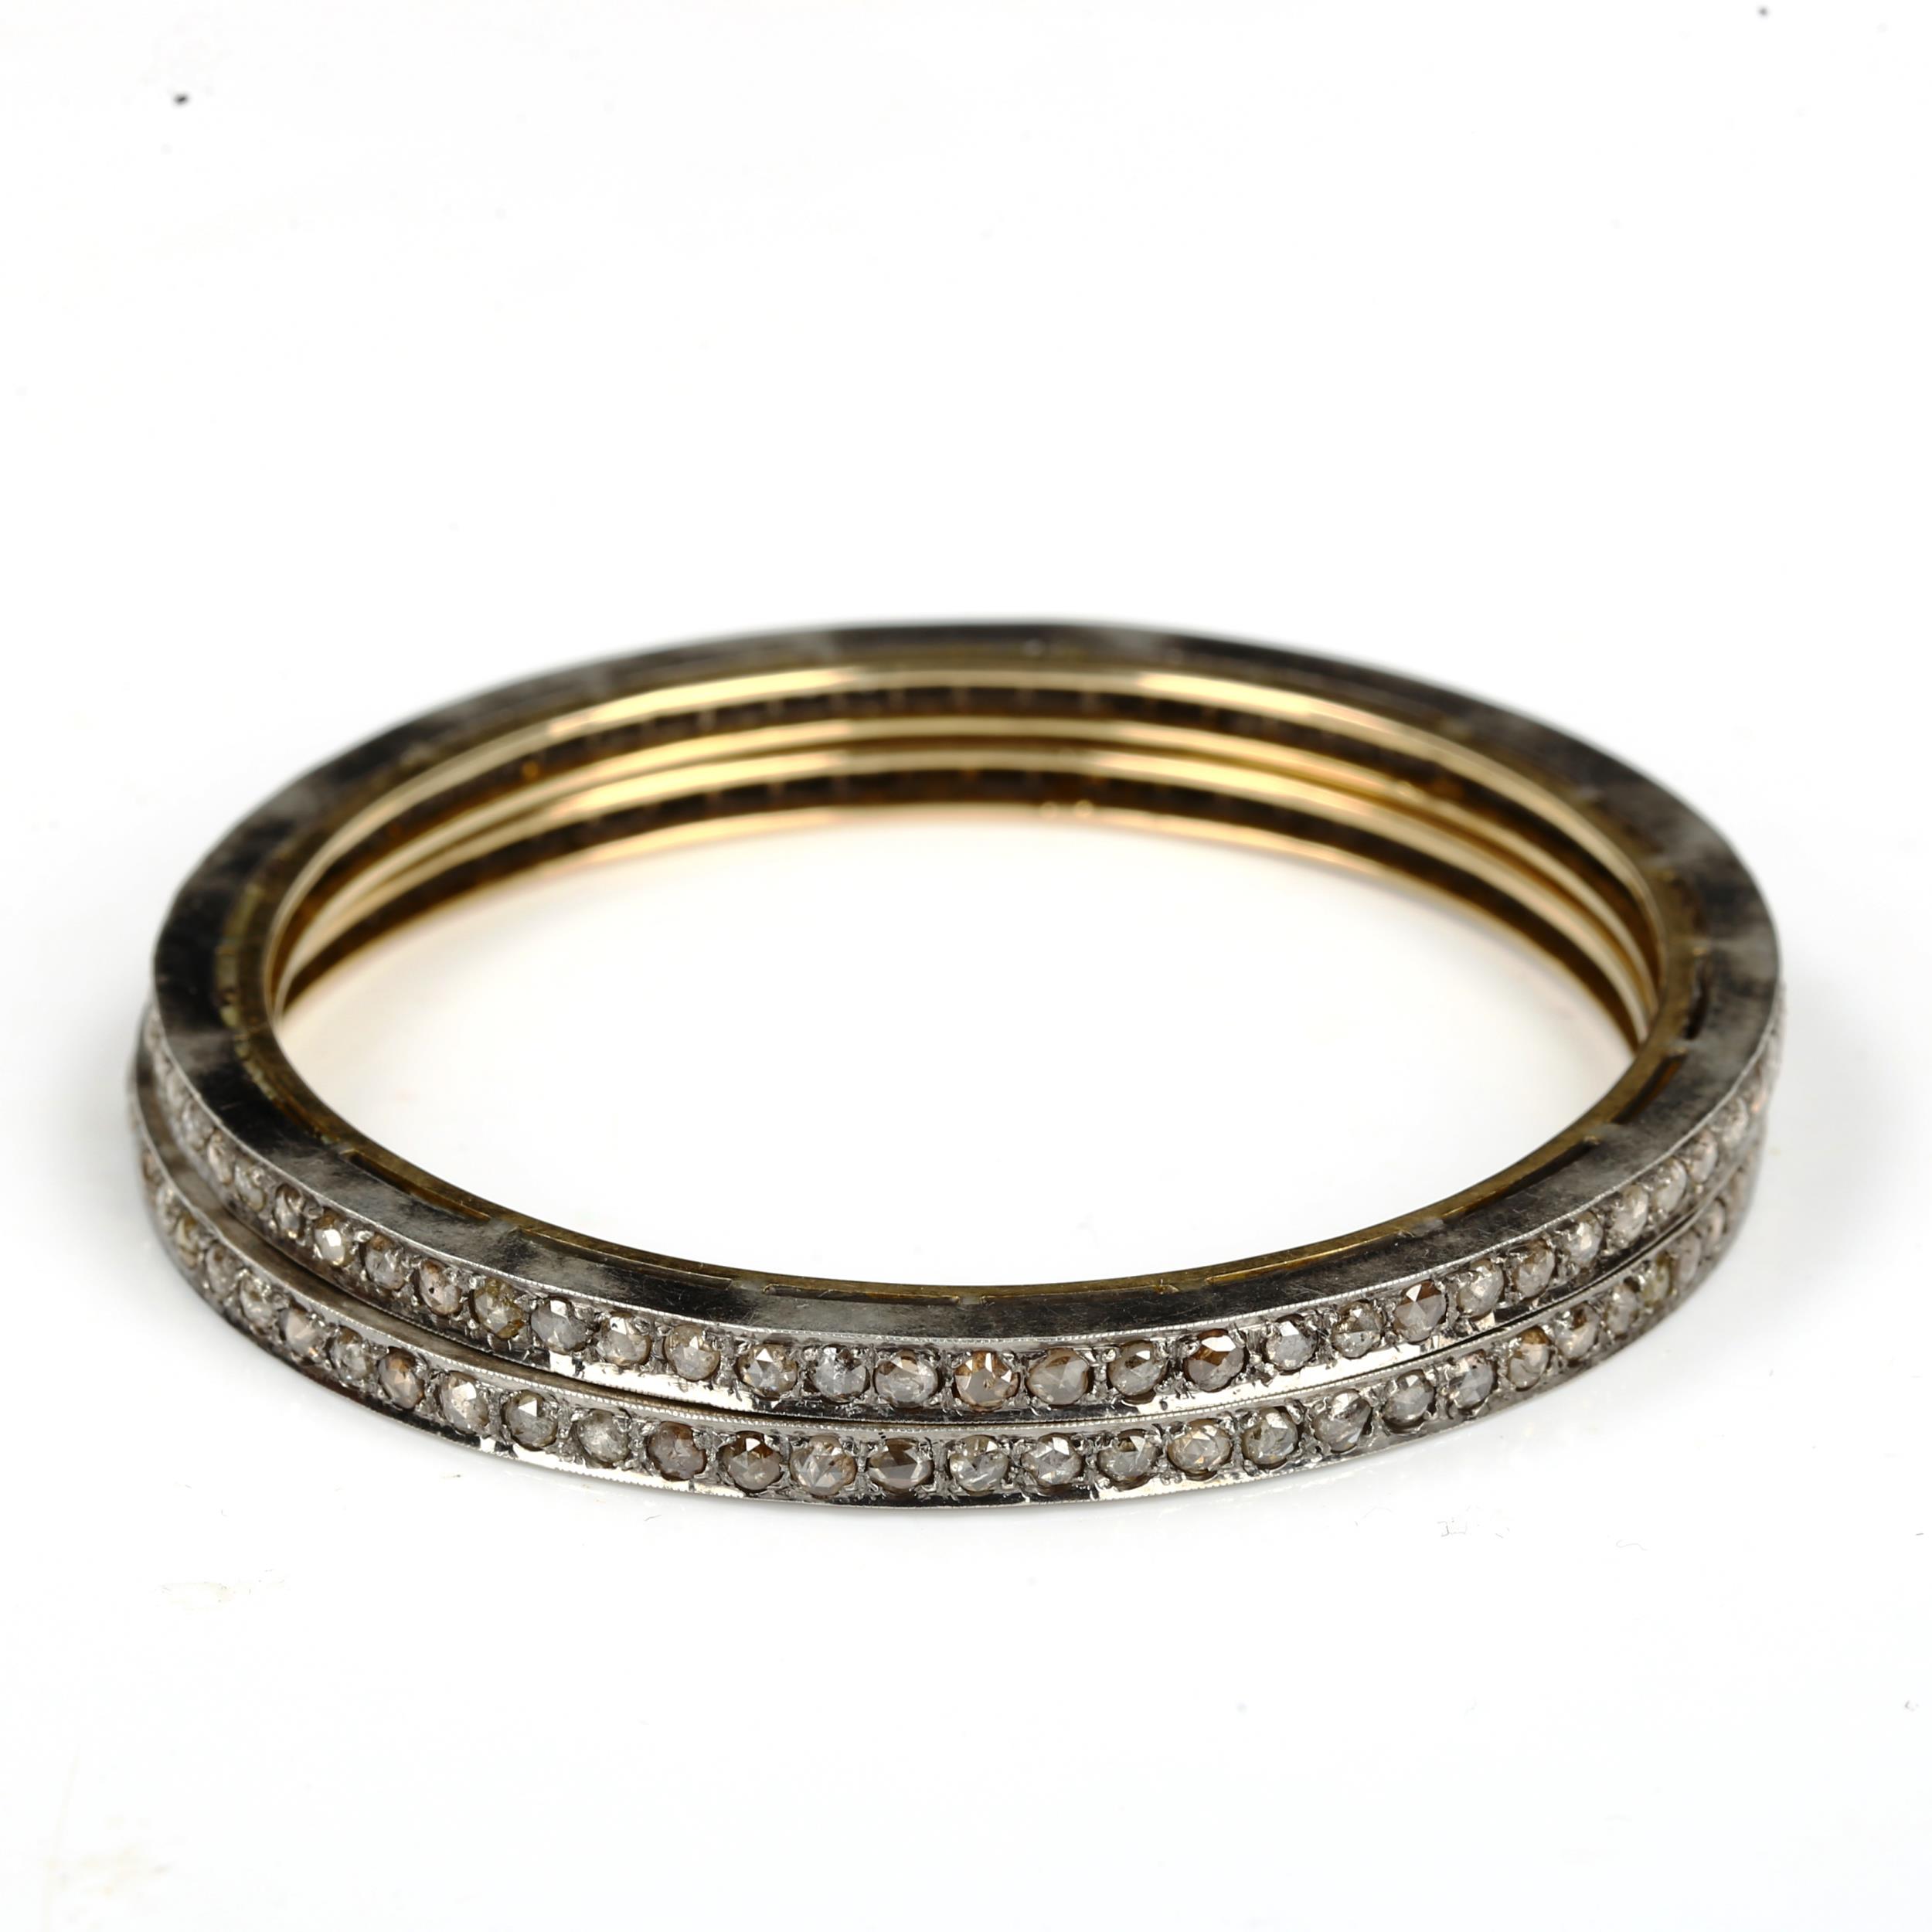 A pair of Indian silver on gold diamond slave bangles, set with rose-cut diamonds, band width 3.6mm, - Image 3 of 4